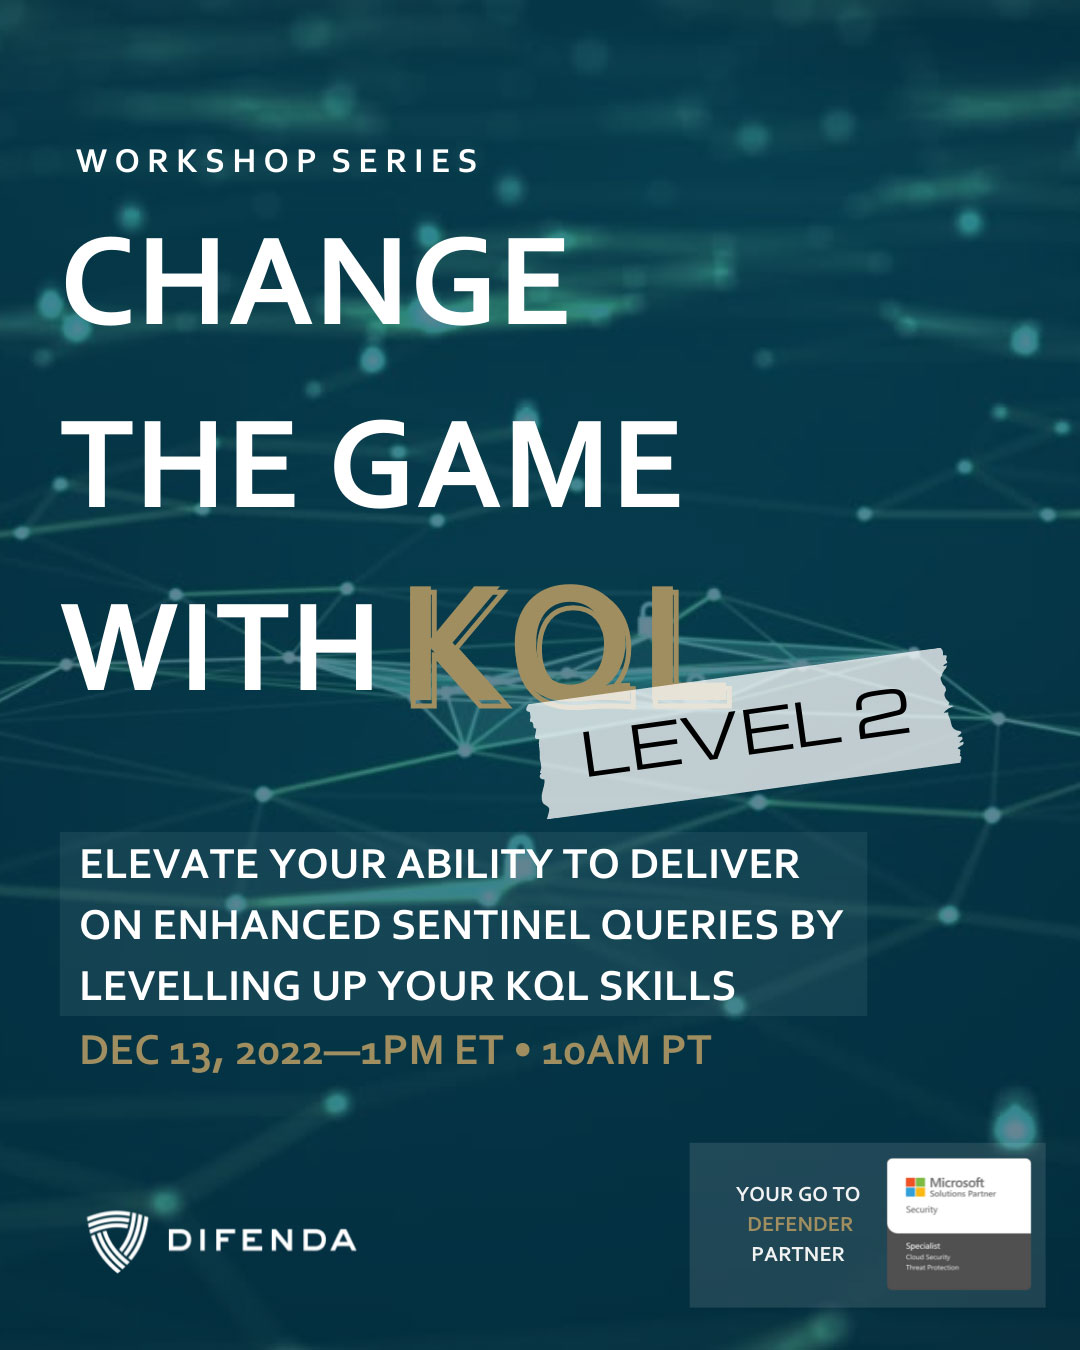 Change the game with KQL Level 2